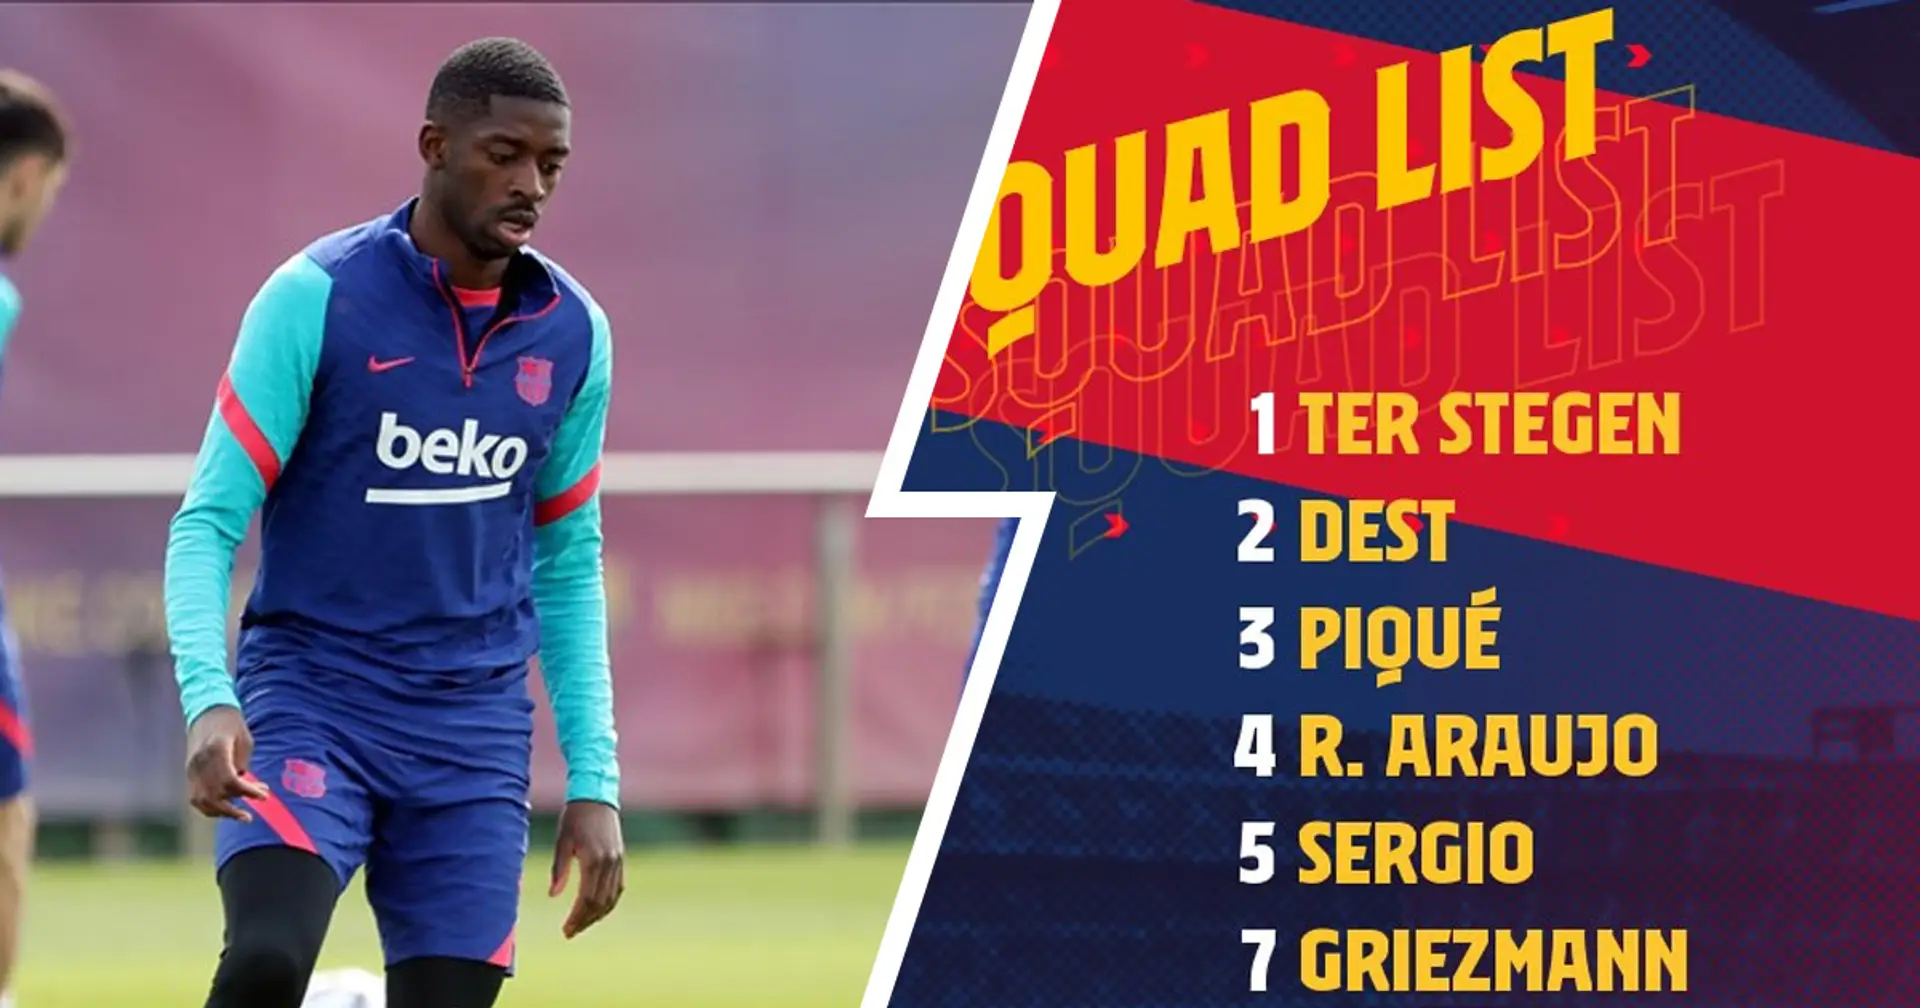 Dembele out: Barcelona announce 23-man squad for Getafe